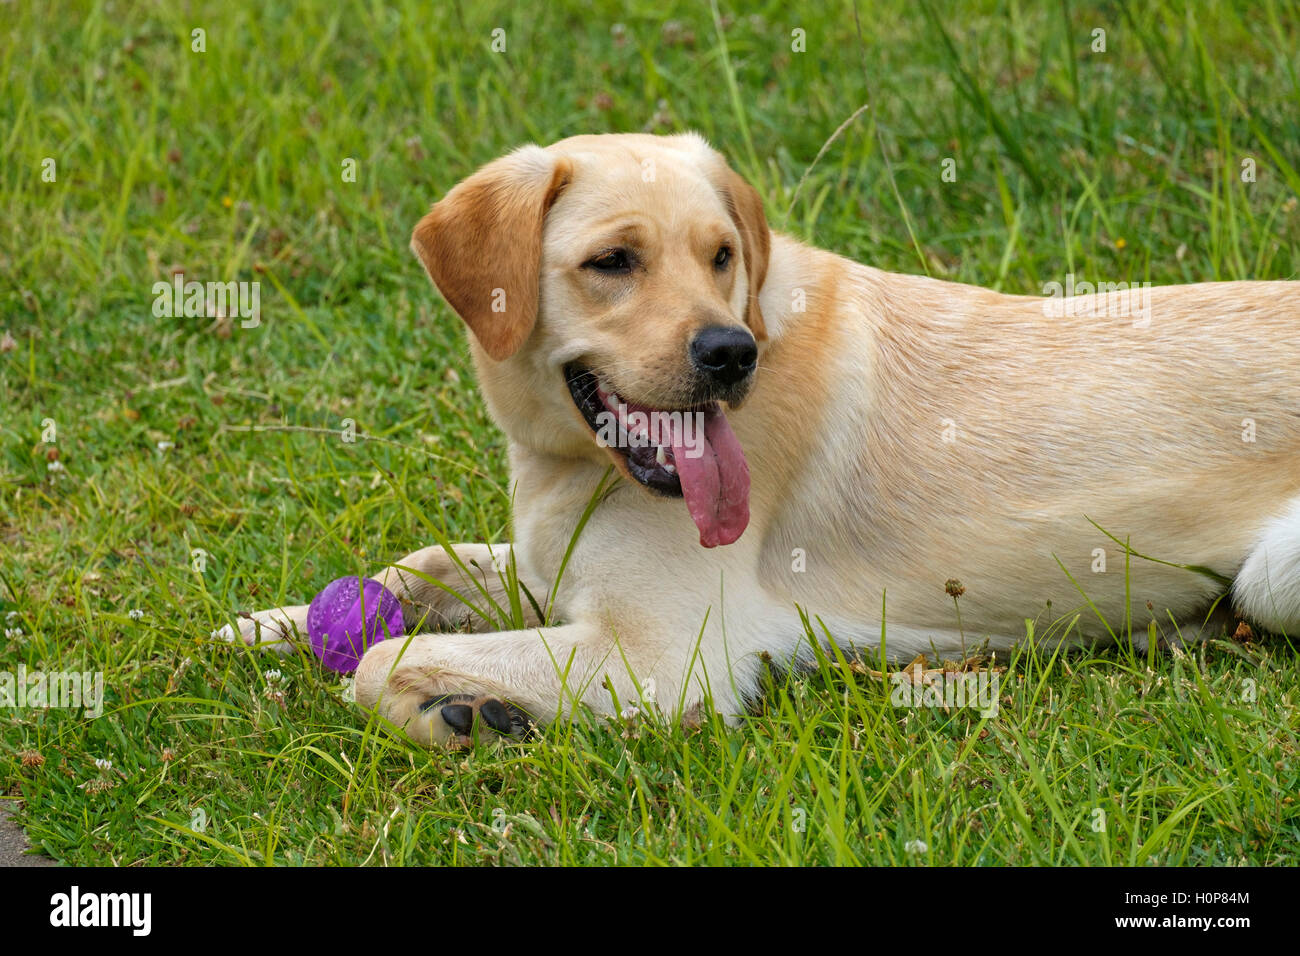 Yellow Labrador Golden Retriever Mix Dog Lying Down On The Lawn With Stock Photo Alamy